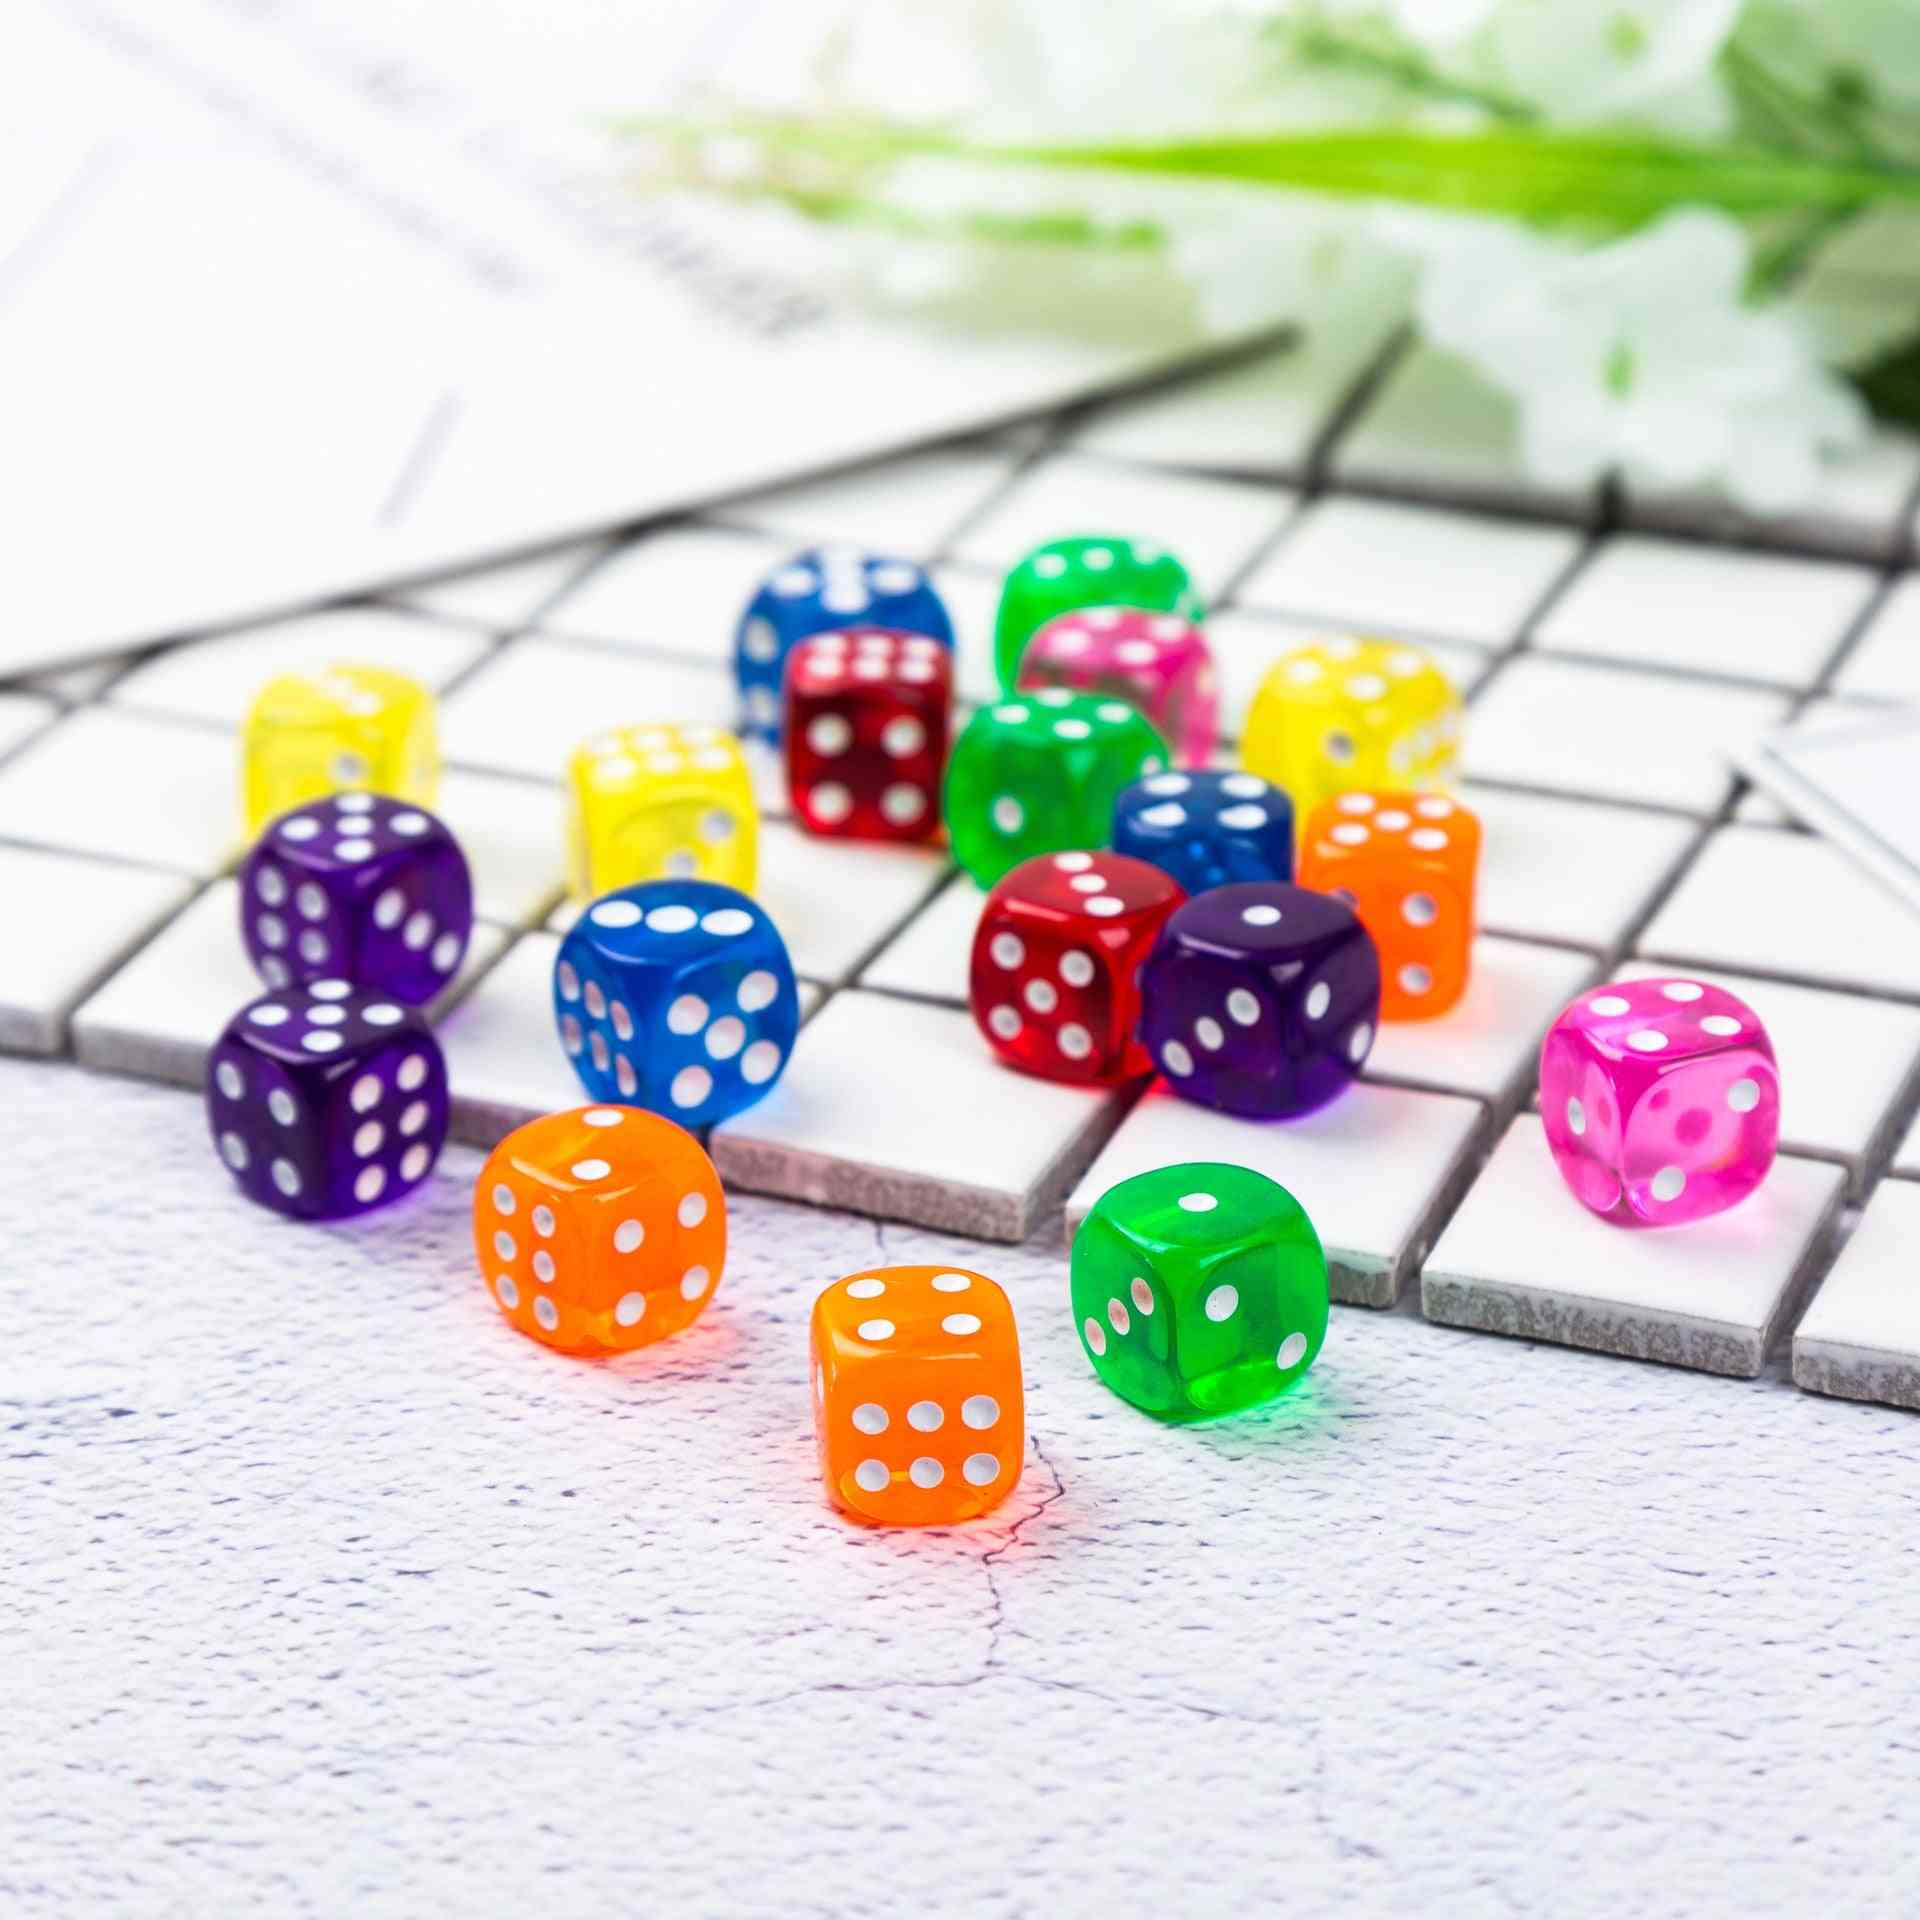 6 Sided Portable Table Games Dice